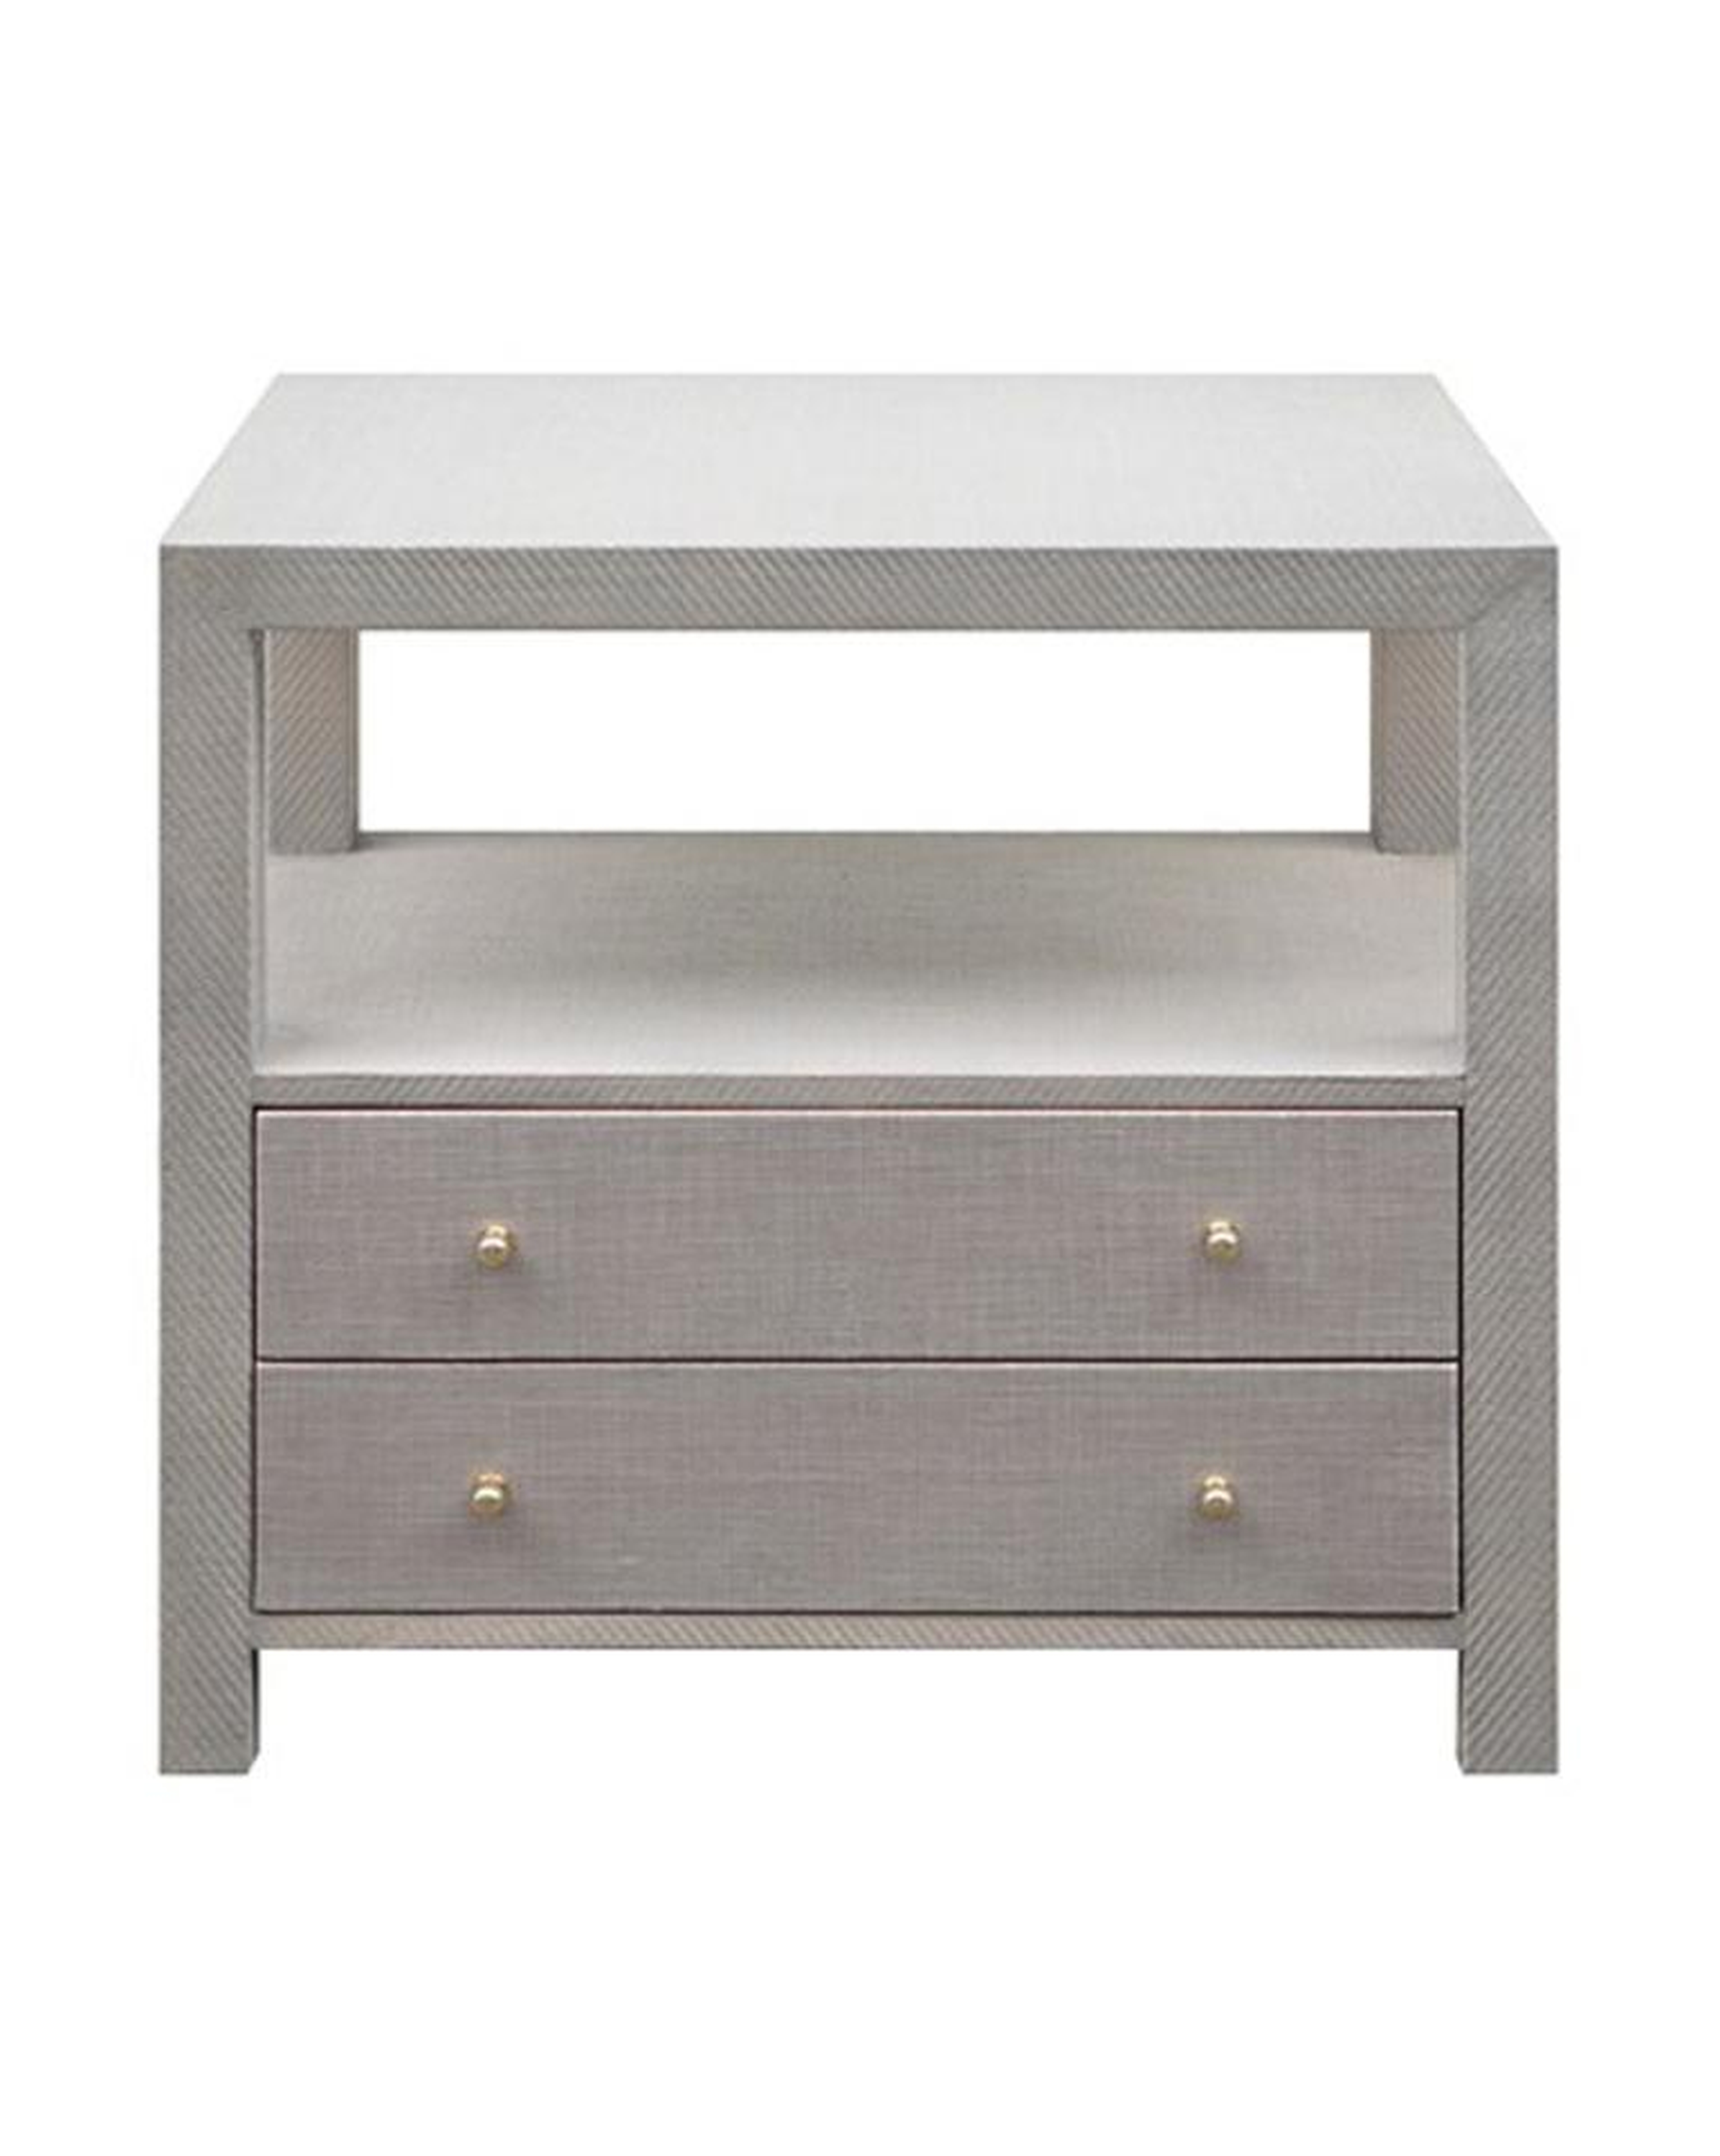 LOUISE NIGHTSTAND, GRAY - McGee & Co.